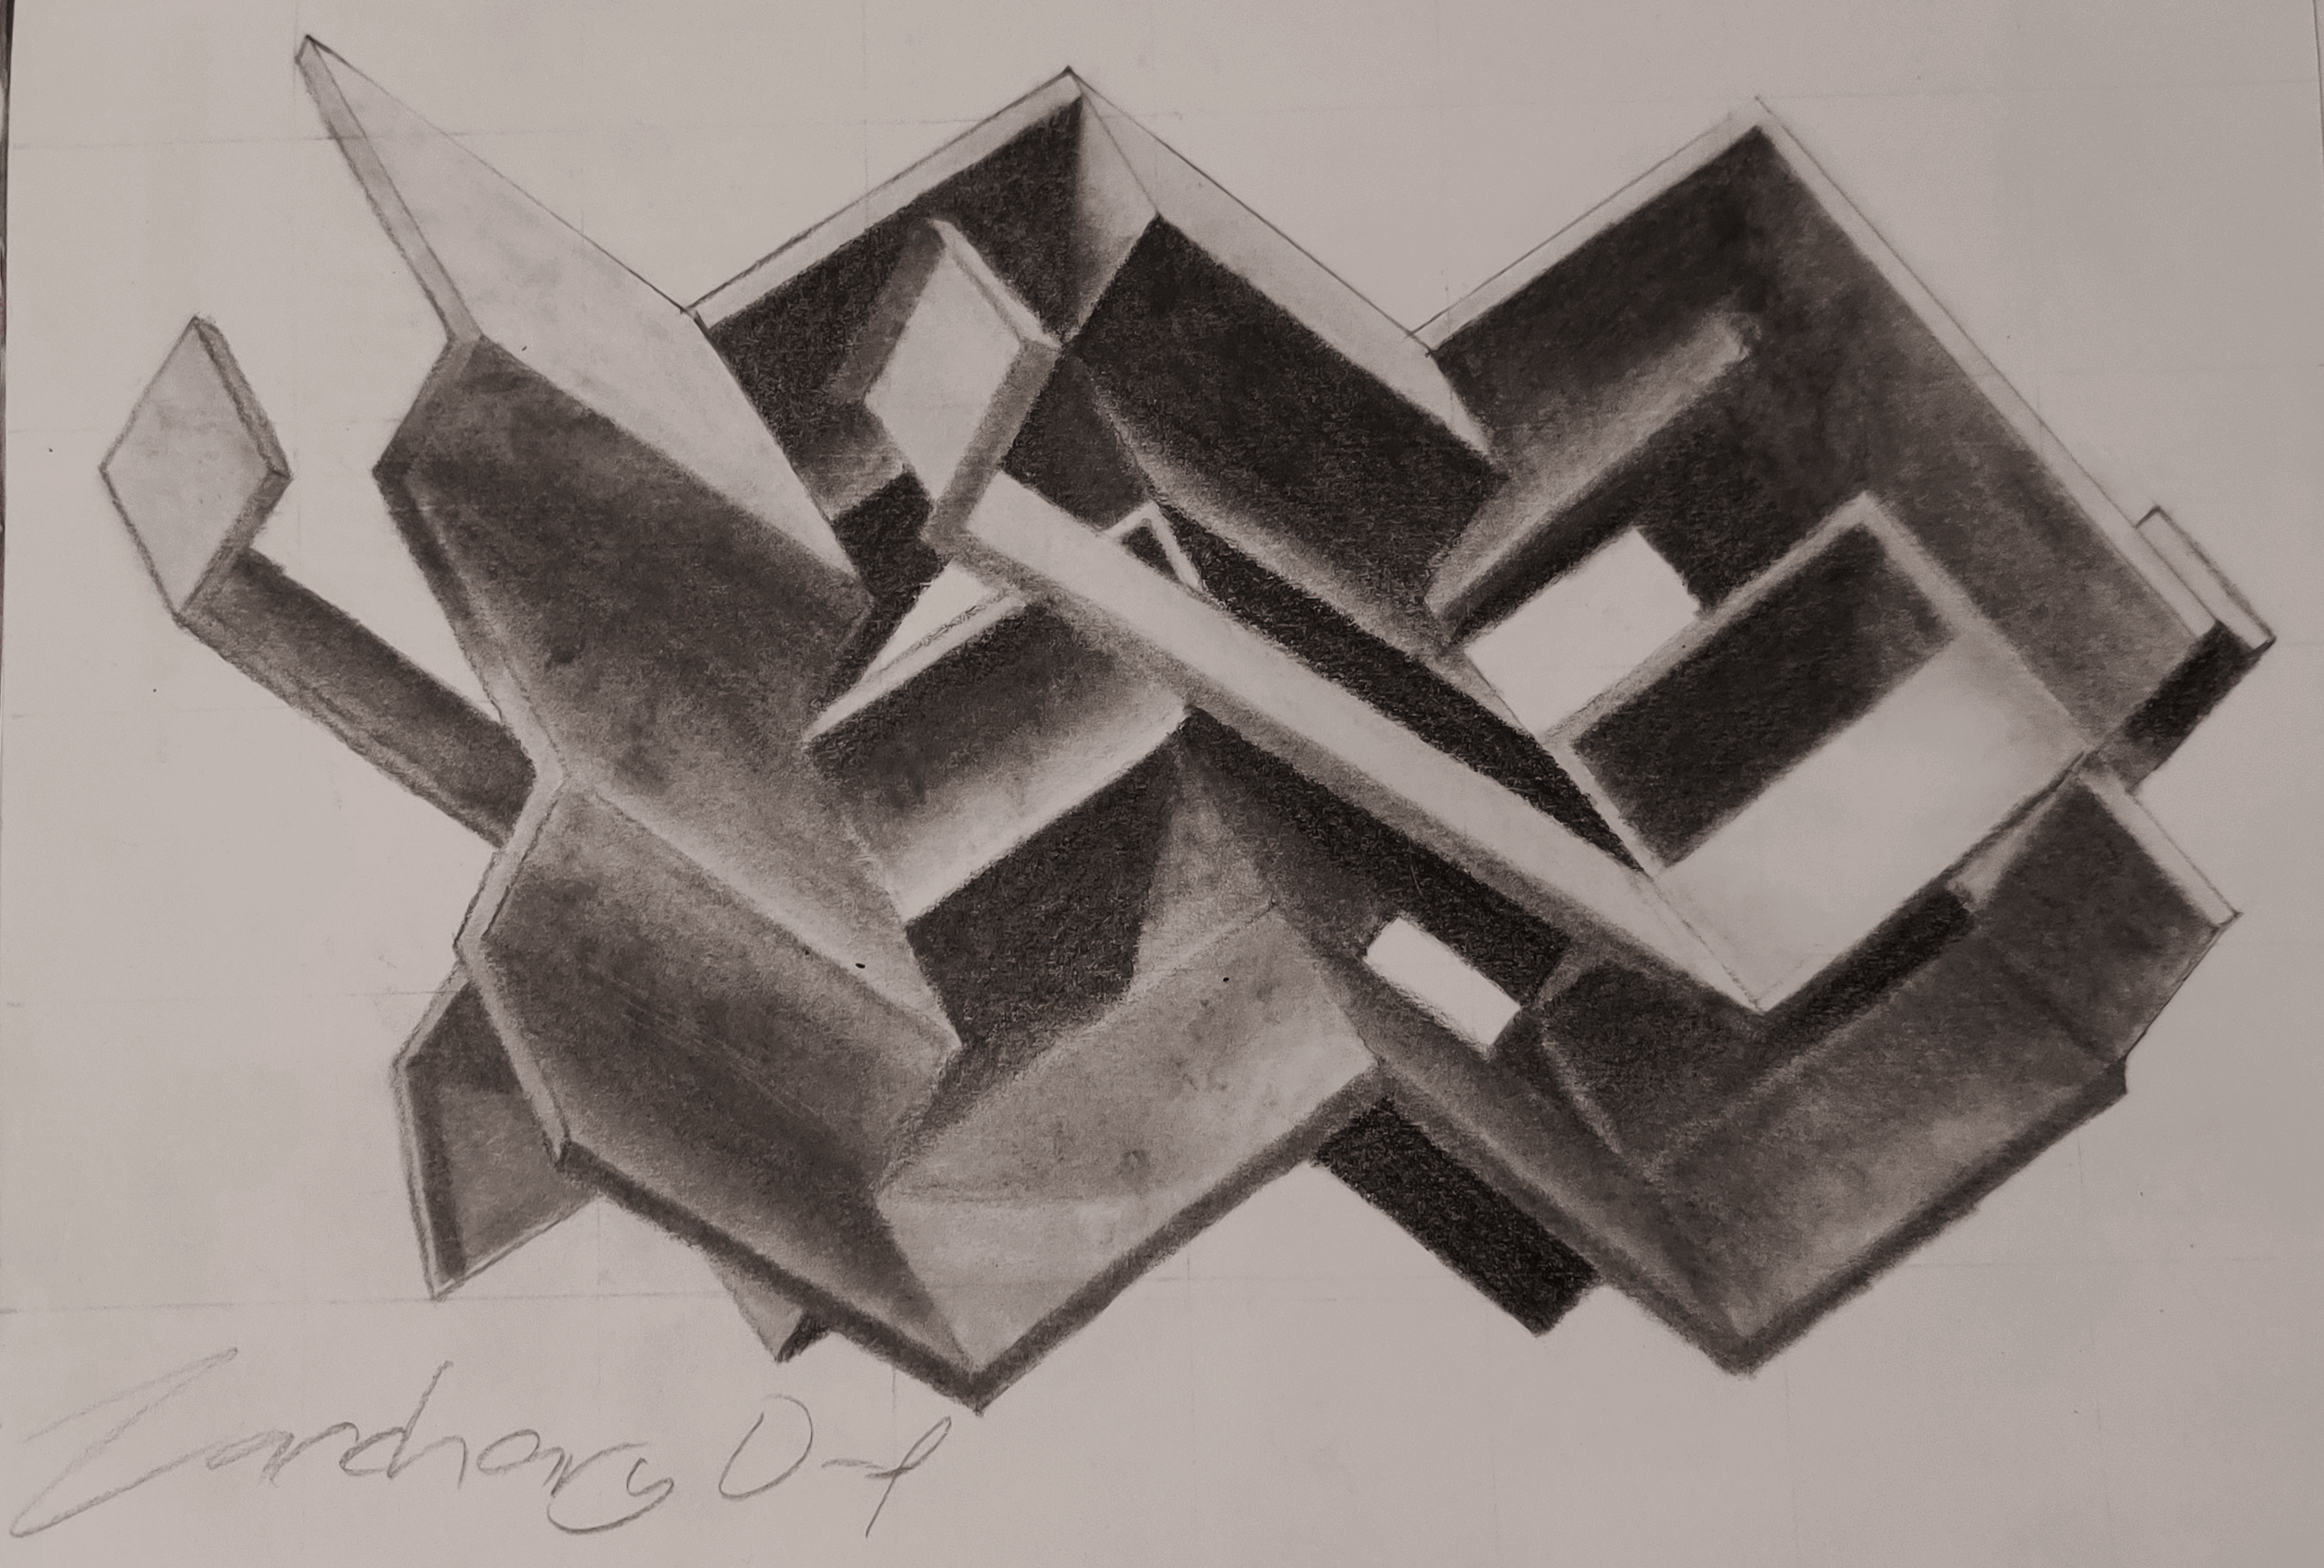 A pencil drawing of an abstract geometric sculpture.